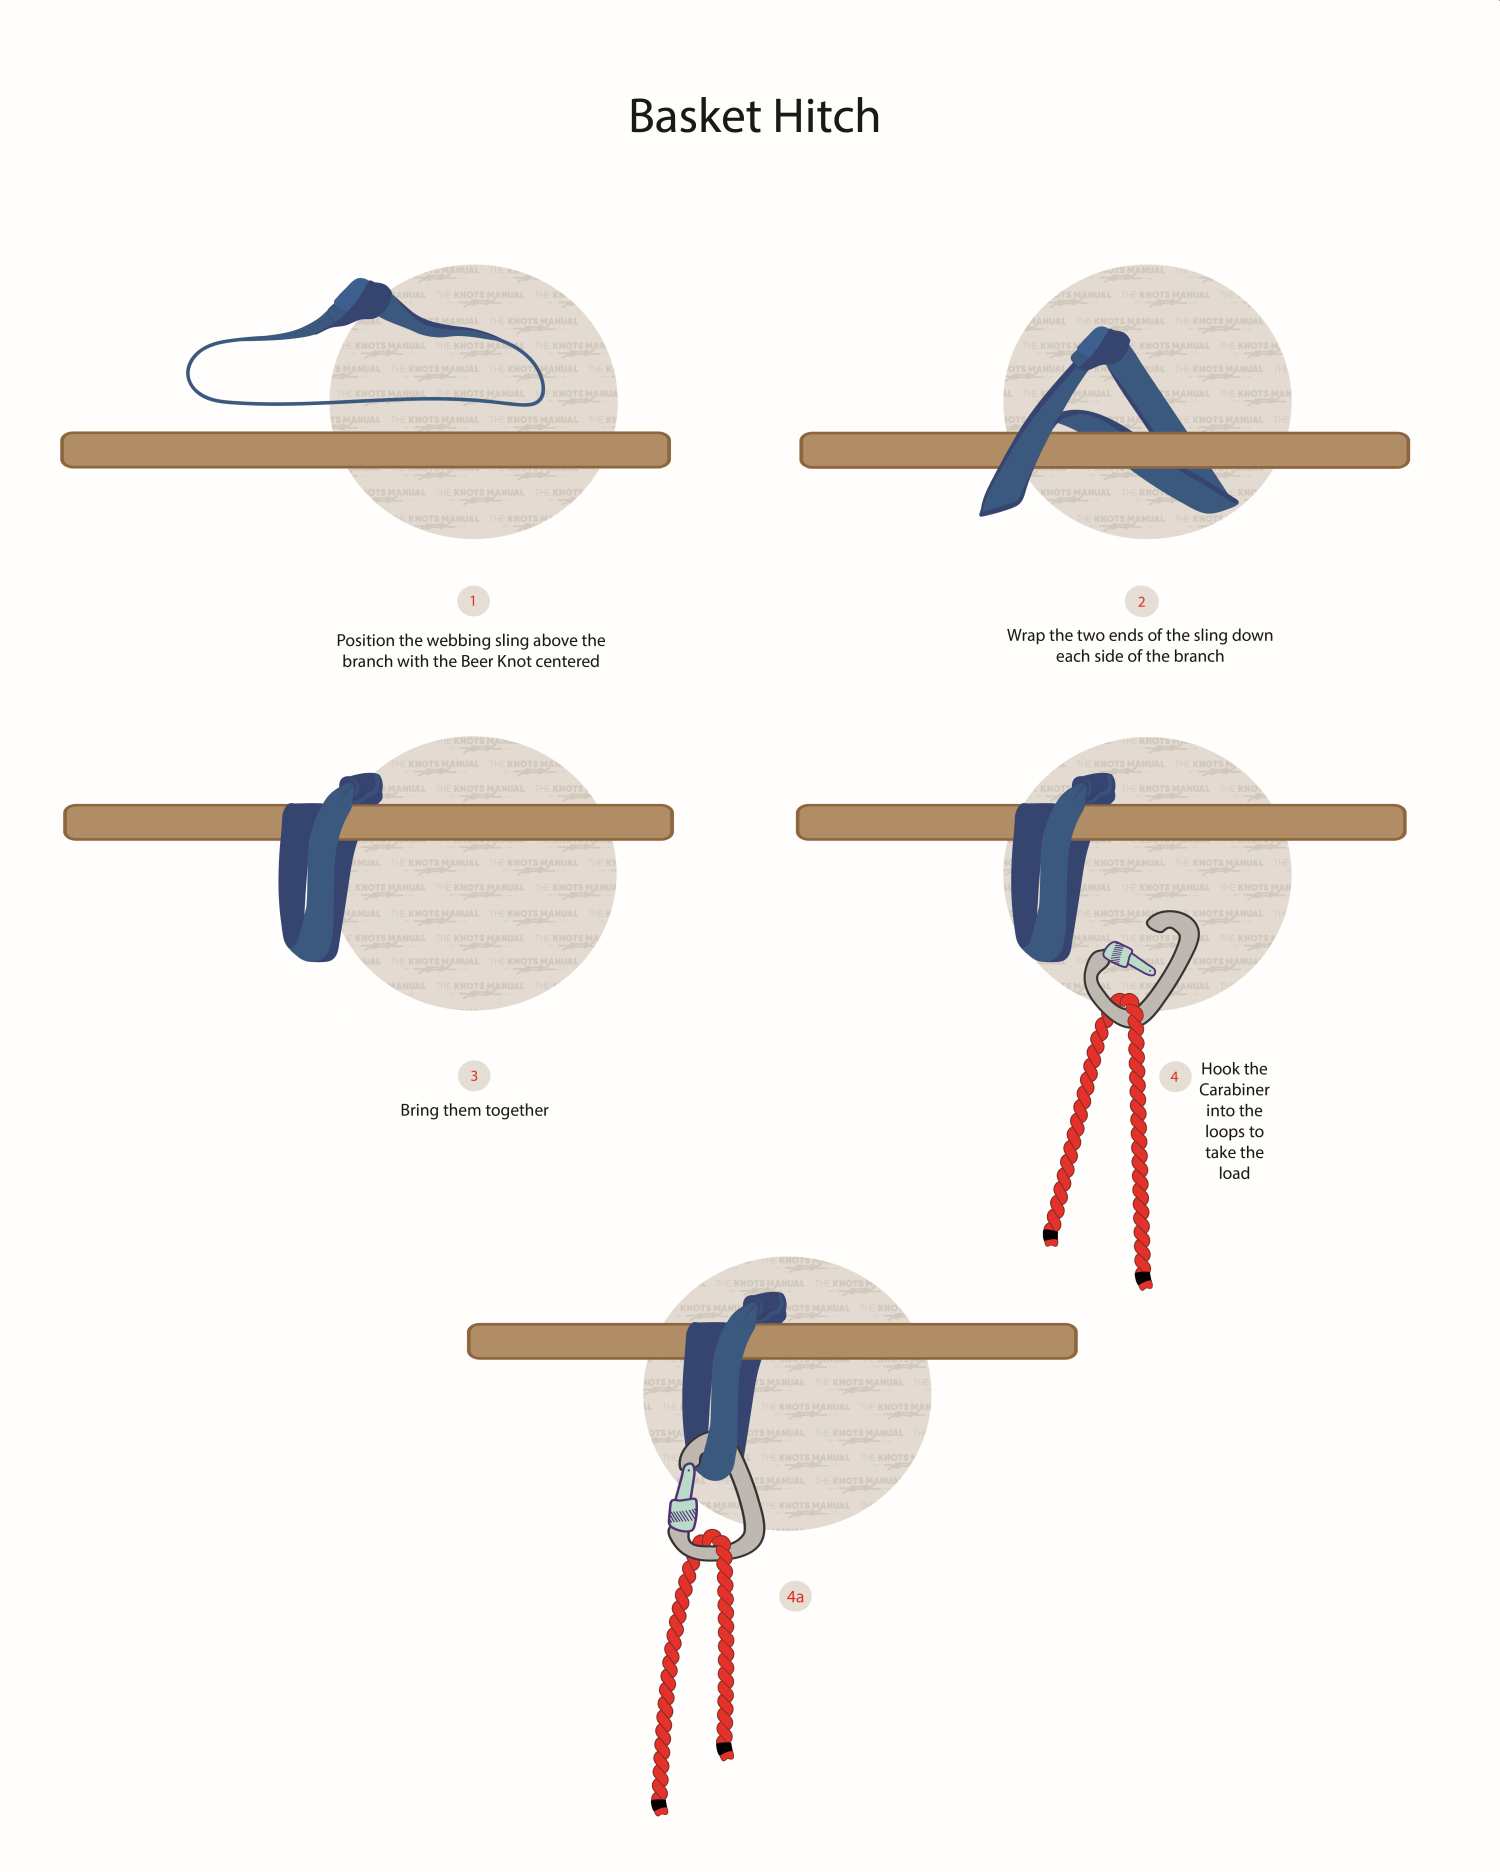 Basket Hitch - Step by Step Guide